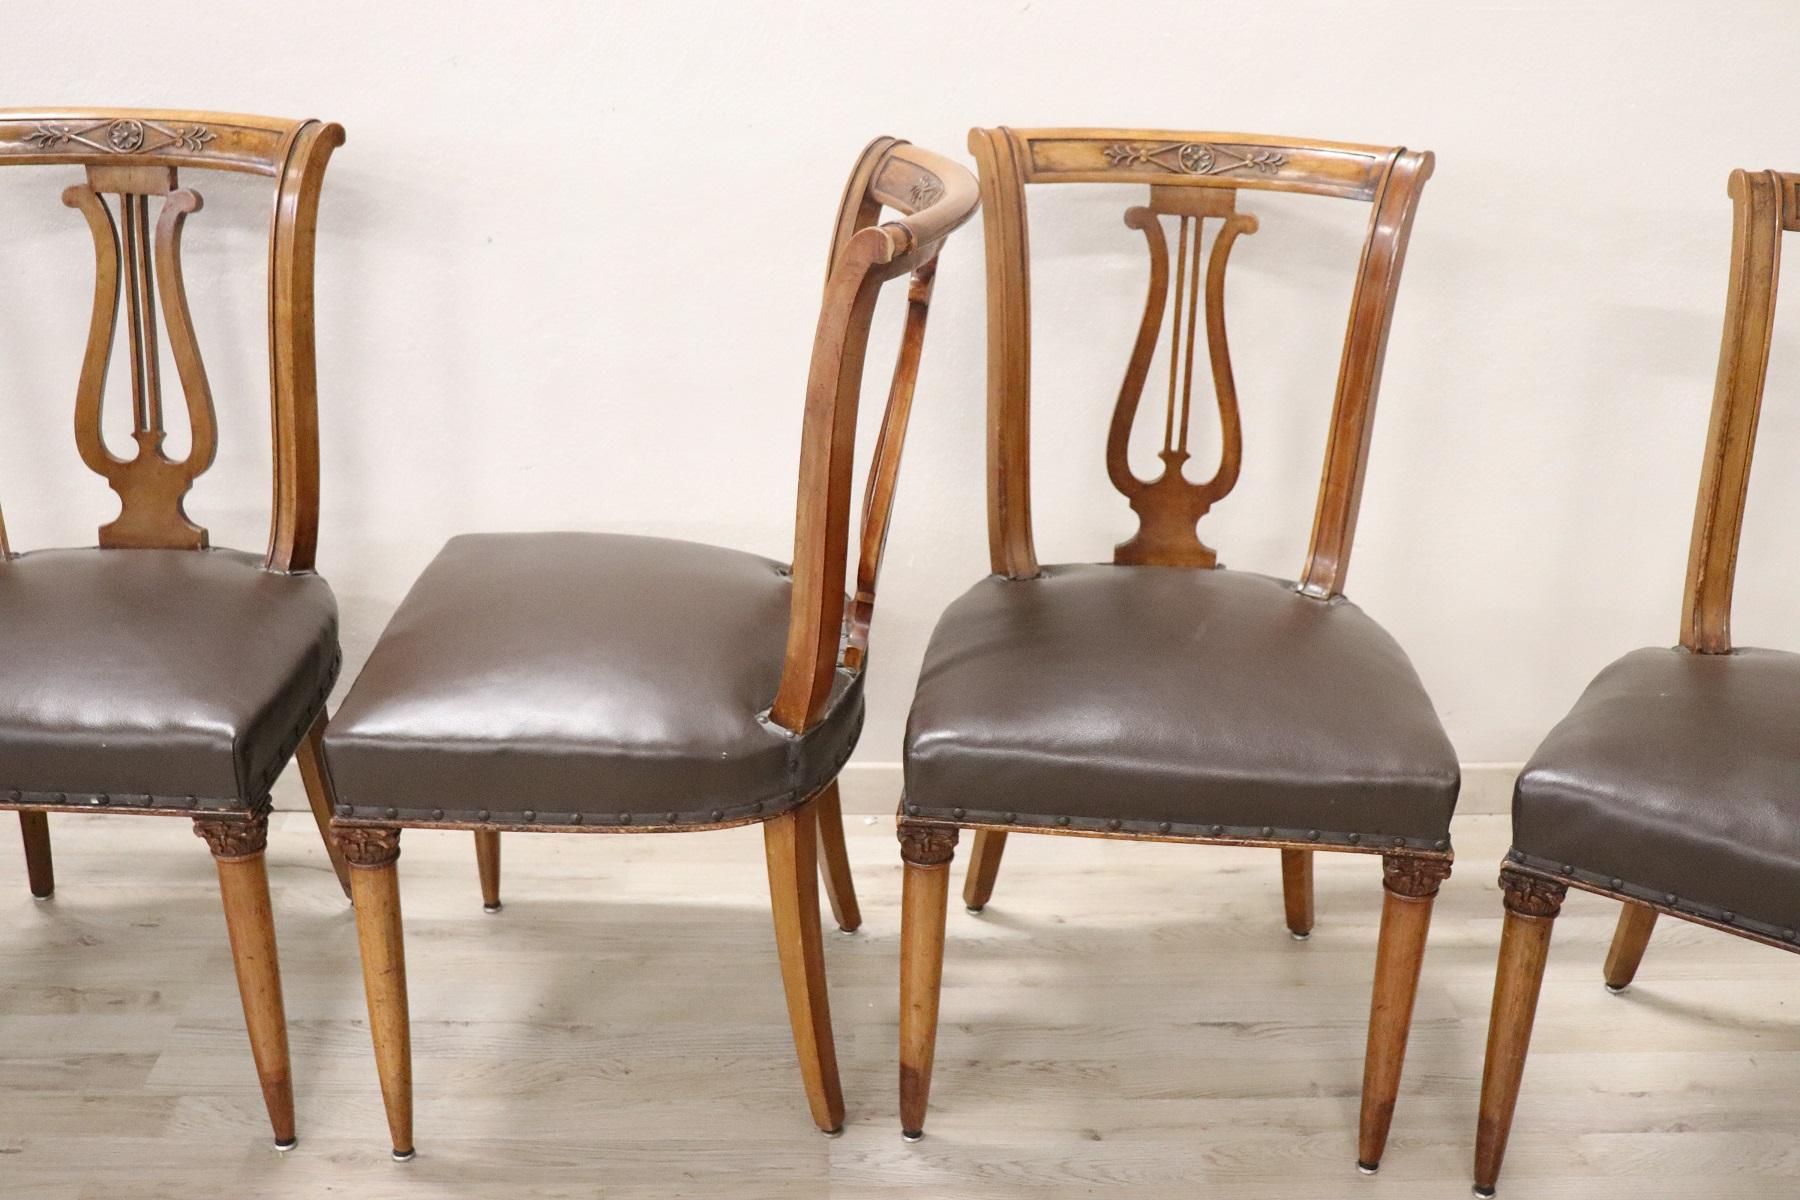 20th Century Italian Neoclassical Style Walnut Carved Set of Six Chairs im Zustand „Hervorragend“ in Casale Monferrato, IT